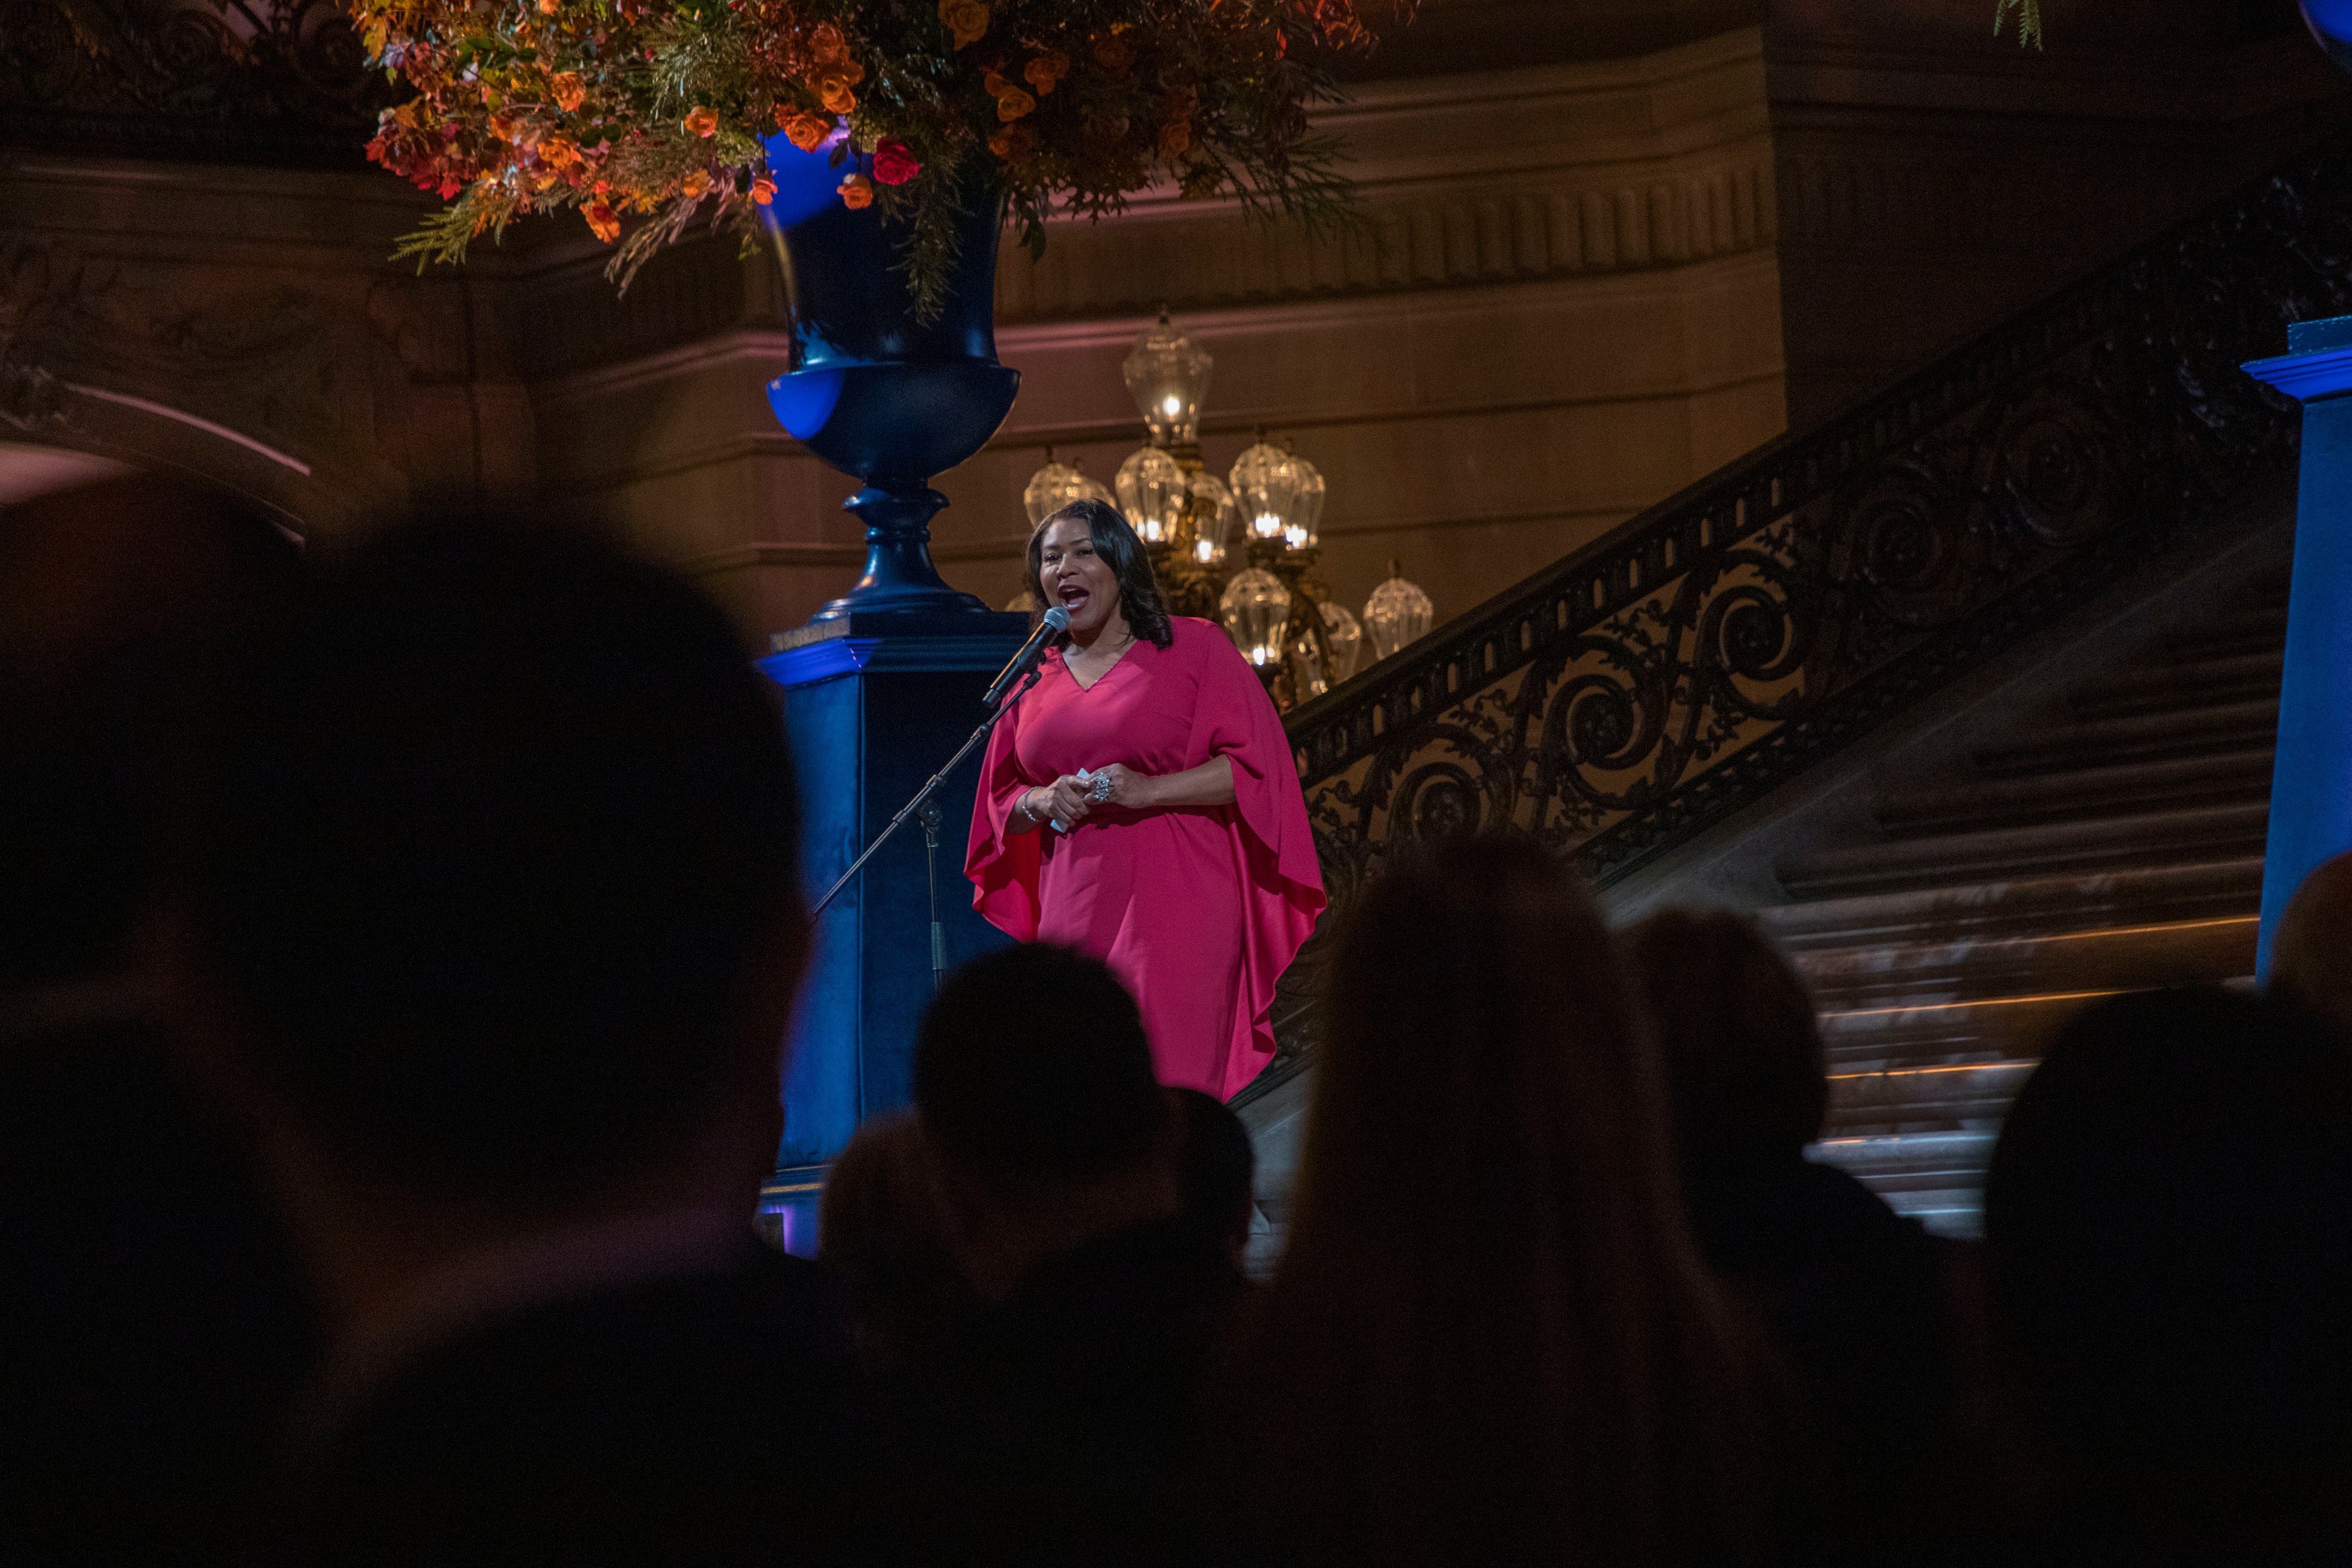 Mayor London Breed welcomes guest inside San Francisco City Hall in a red dress.